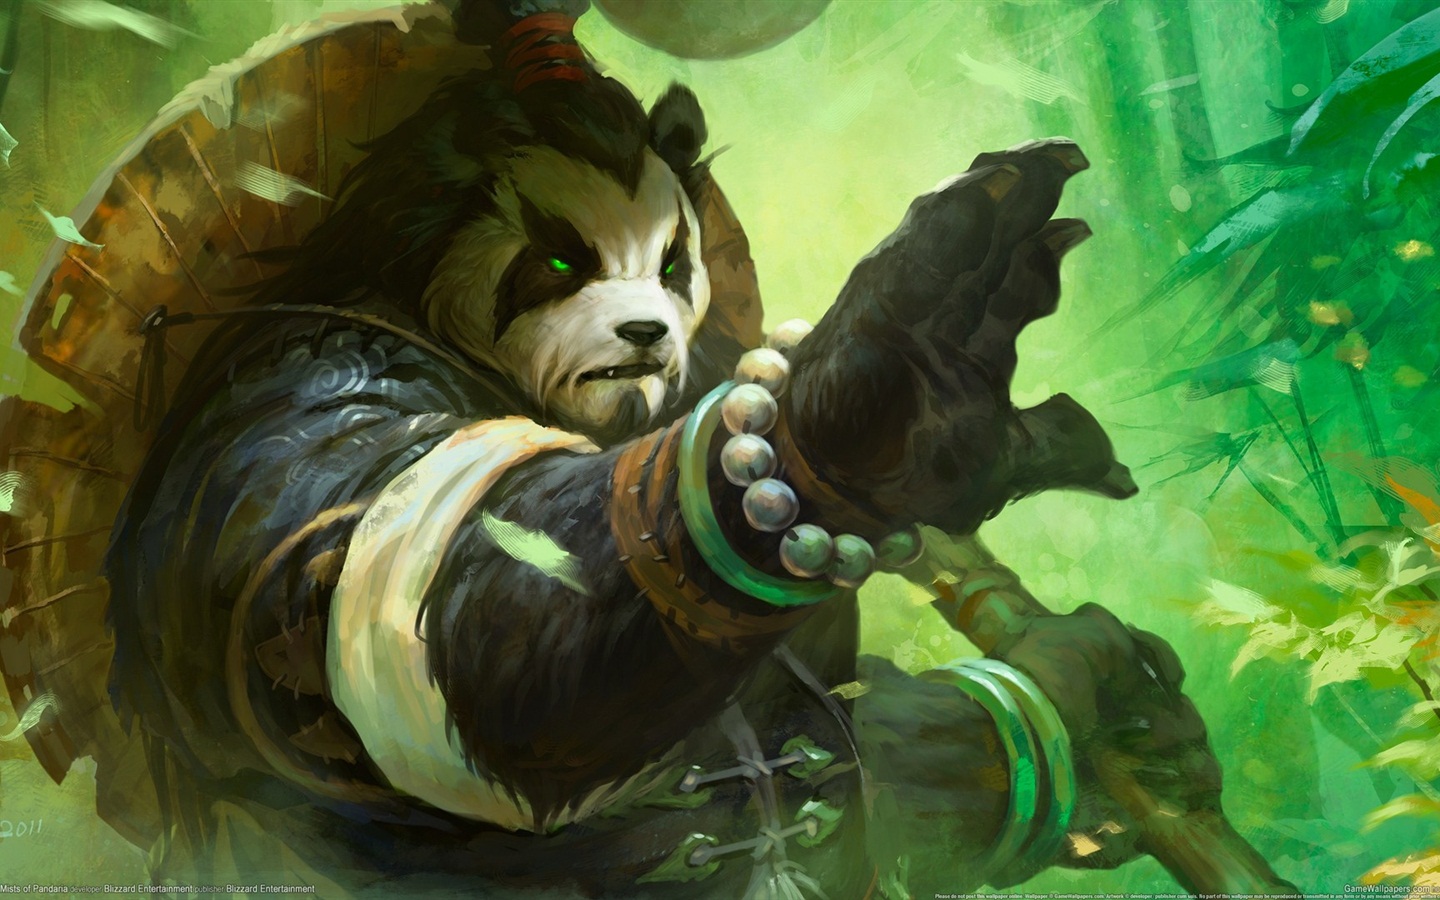 World of Warcraft: Mists of Pandaria HD wallpapers #11 - 1440x900